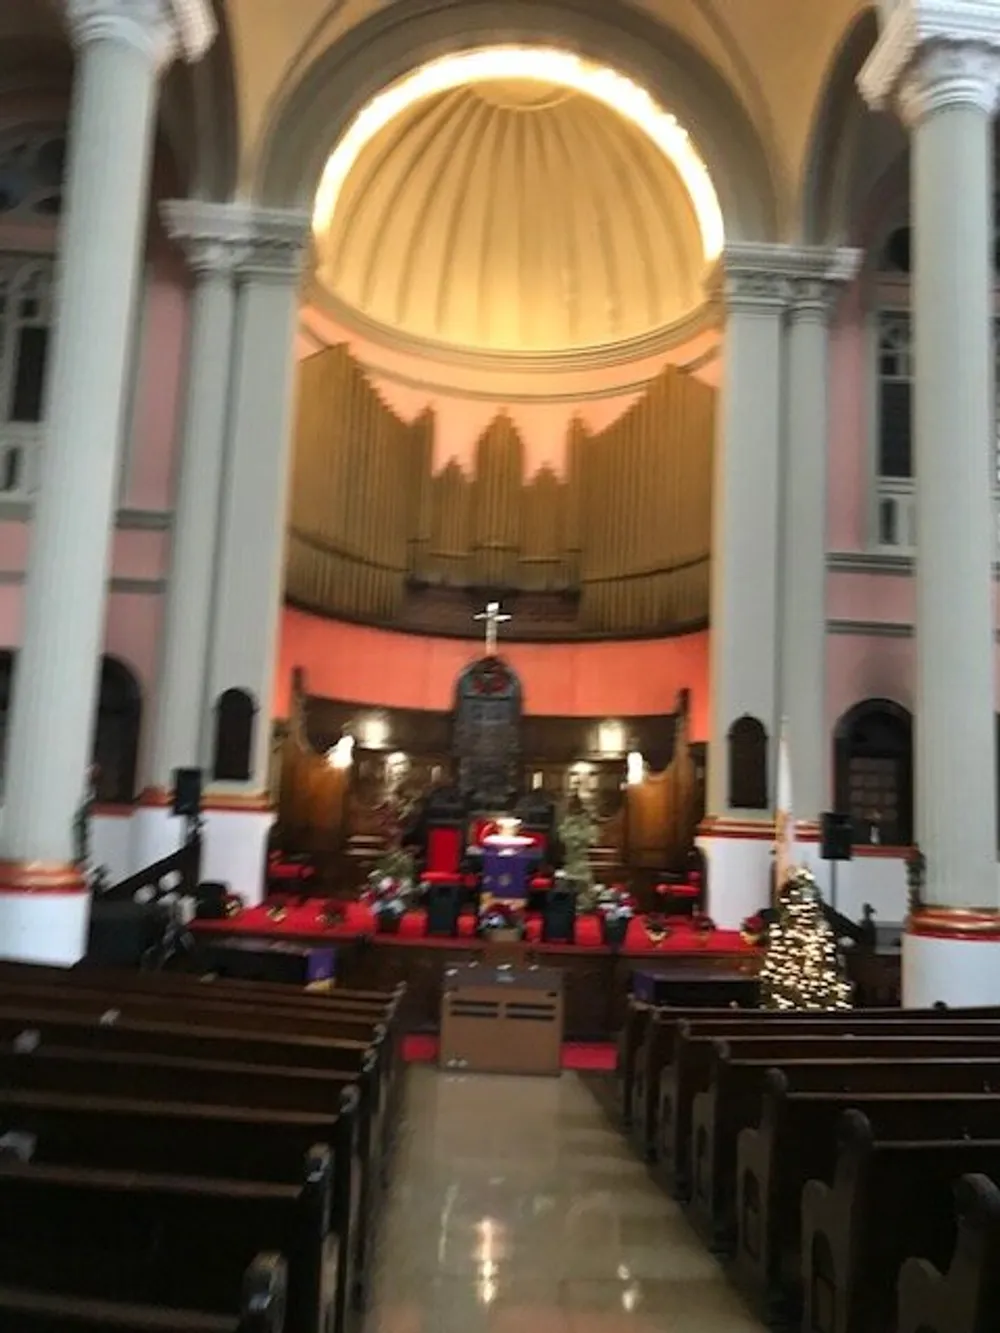 The image shows the interior of a church with rows of pews a decorated Christmas tree and a prominent organ at the back of the altar area under a rounded ceiling